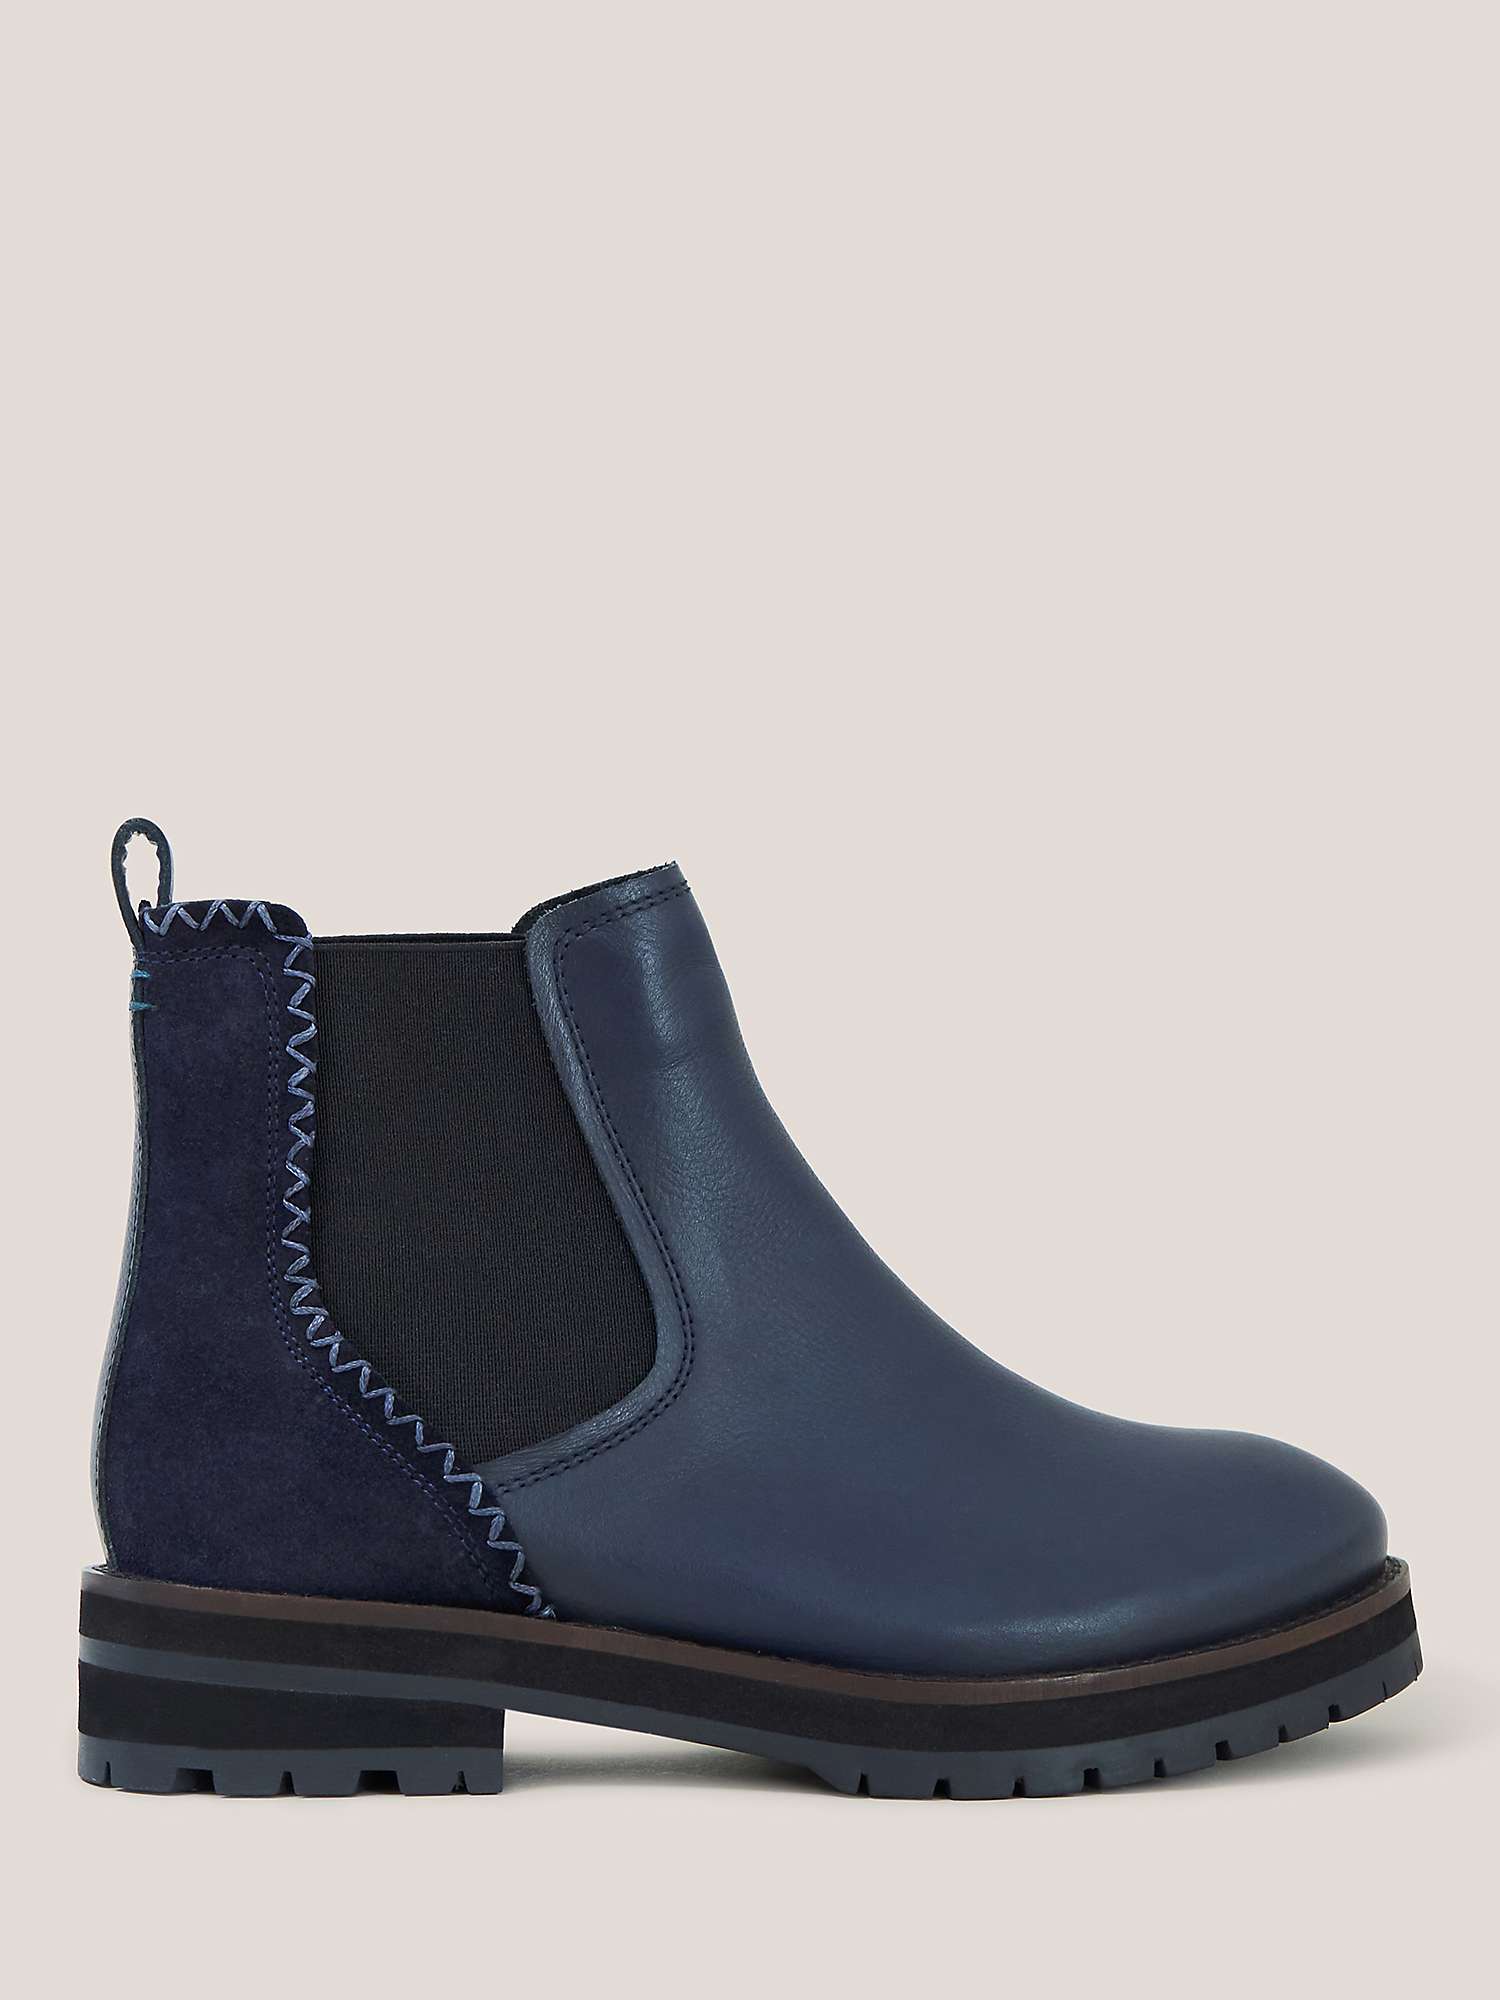 Buy White Stuff Leather Chelsea Boots Online at johnlewis.com